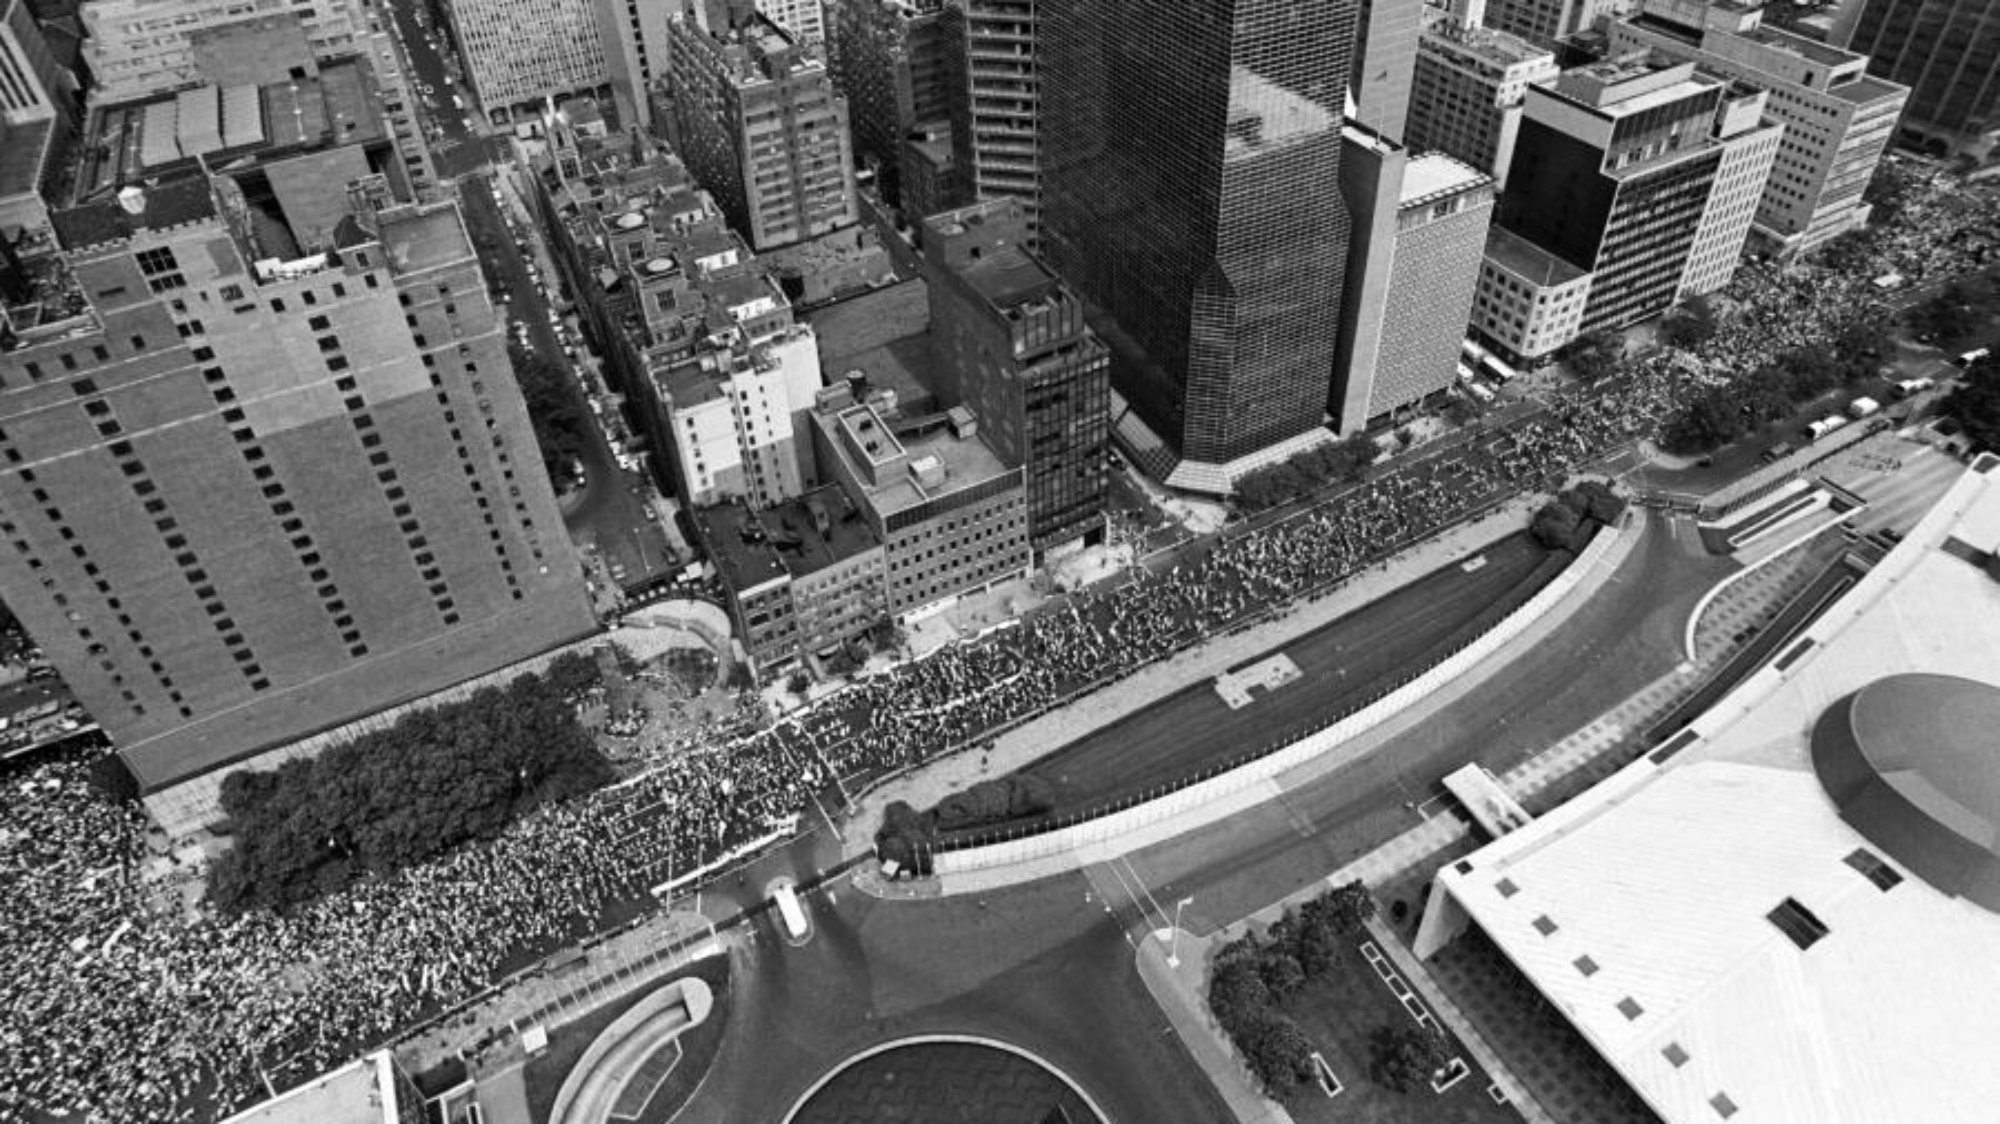 An aerial view of thousands of demonstrators filing past United Nations Headquarters on their way to today's Peace Rally in Central Park. The rally was timed to coincide with the UN General Assembly's second Special Session on Disarmament. An estimated three-quarters of a million people gathered in the cause of world nuclear disarmament, making it the largest demonstration of its kind ever to take place in the United States.